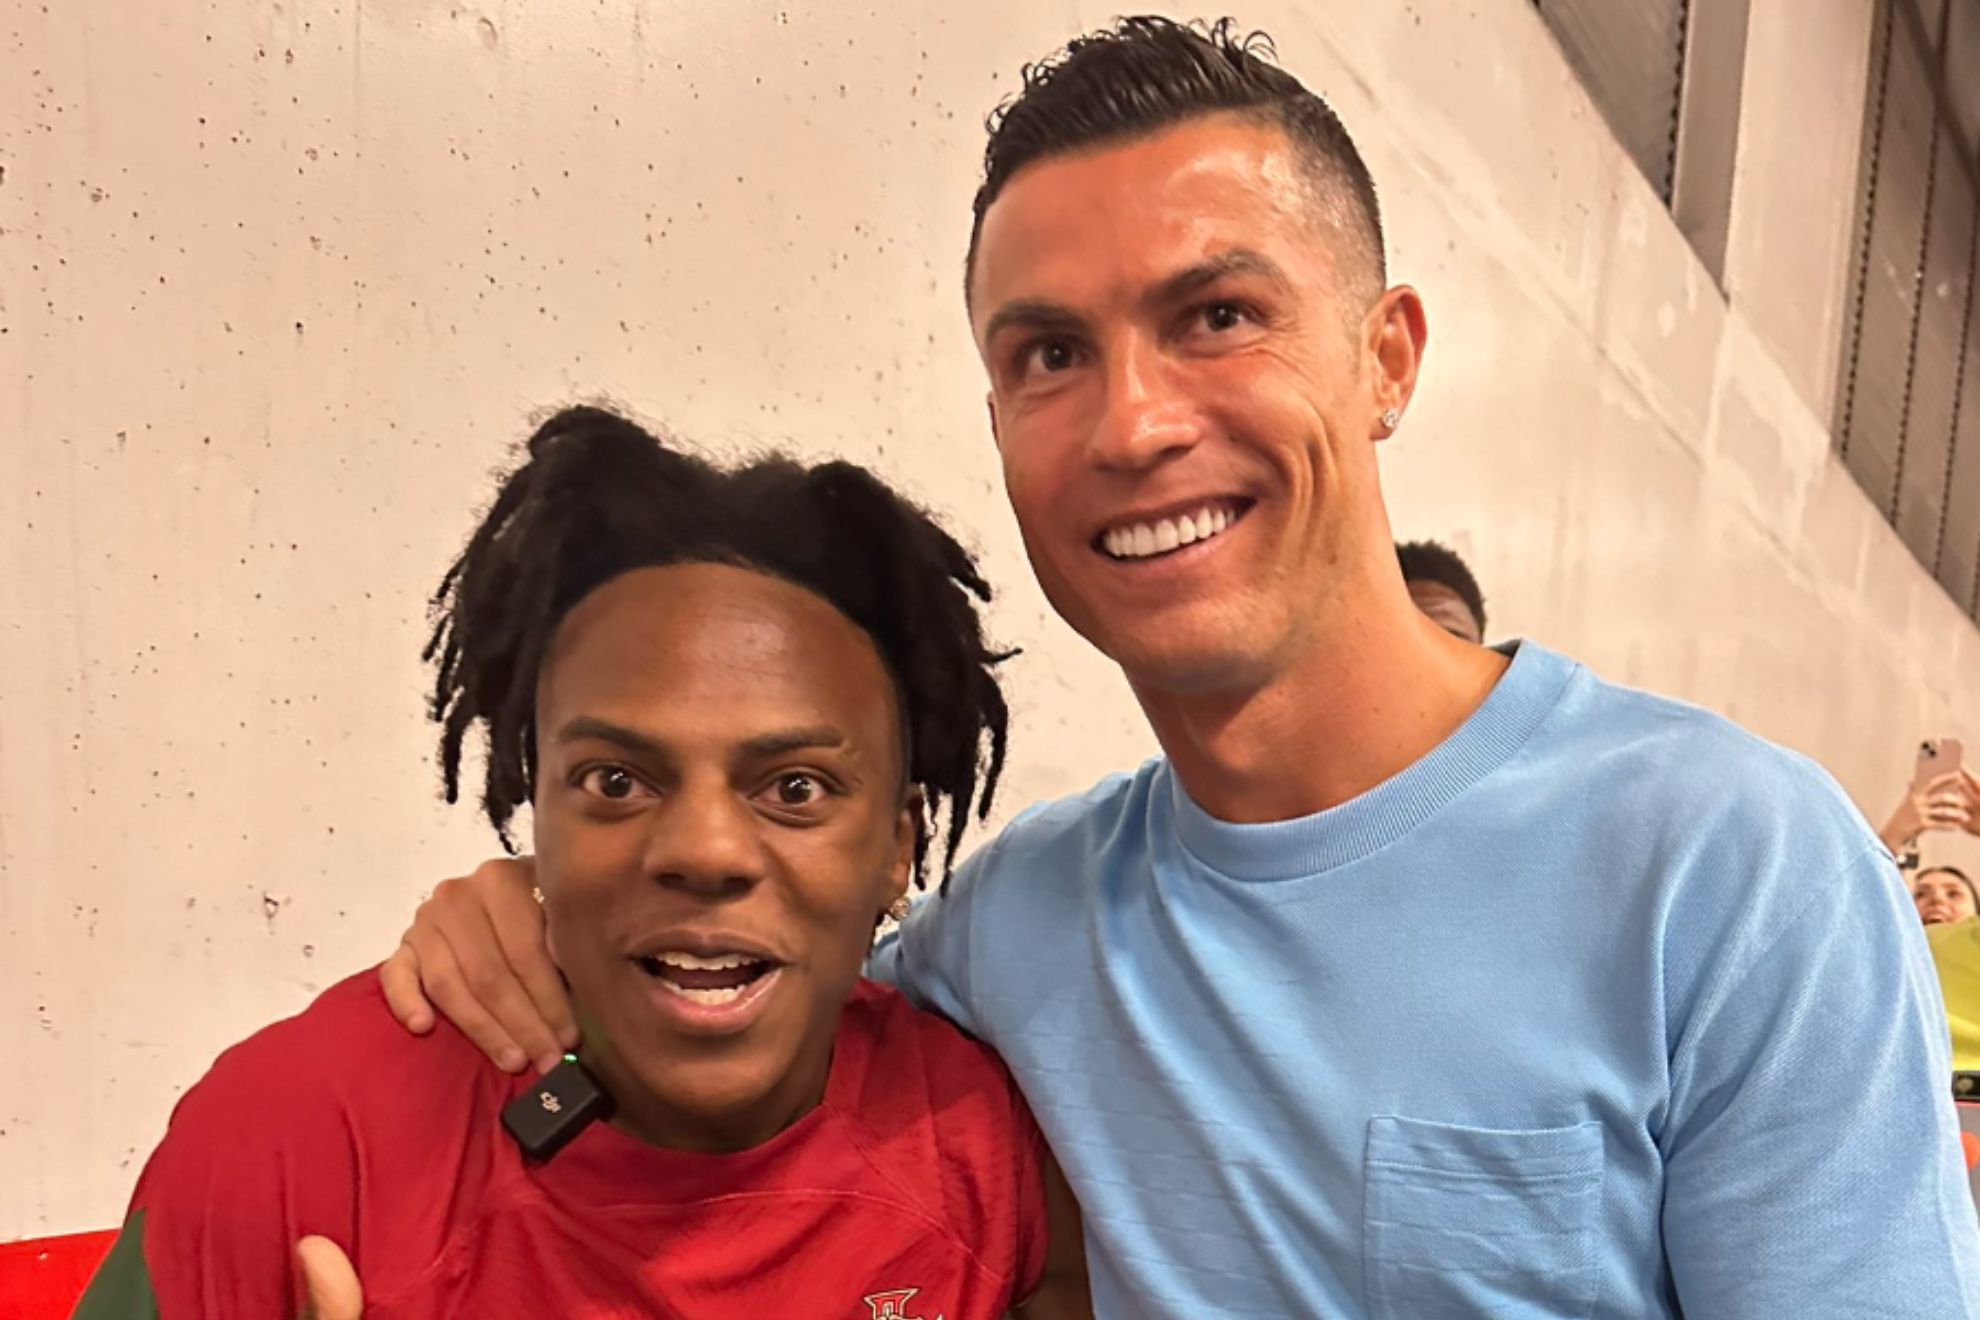 Leao was able to introduce the famous streamer to Ronaldo after Portugal's qualifiier